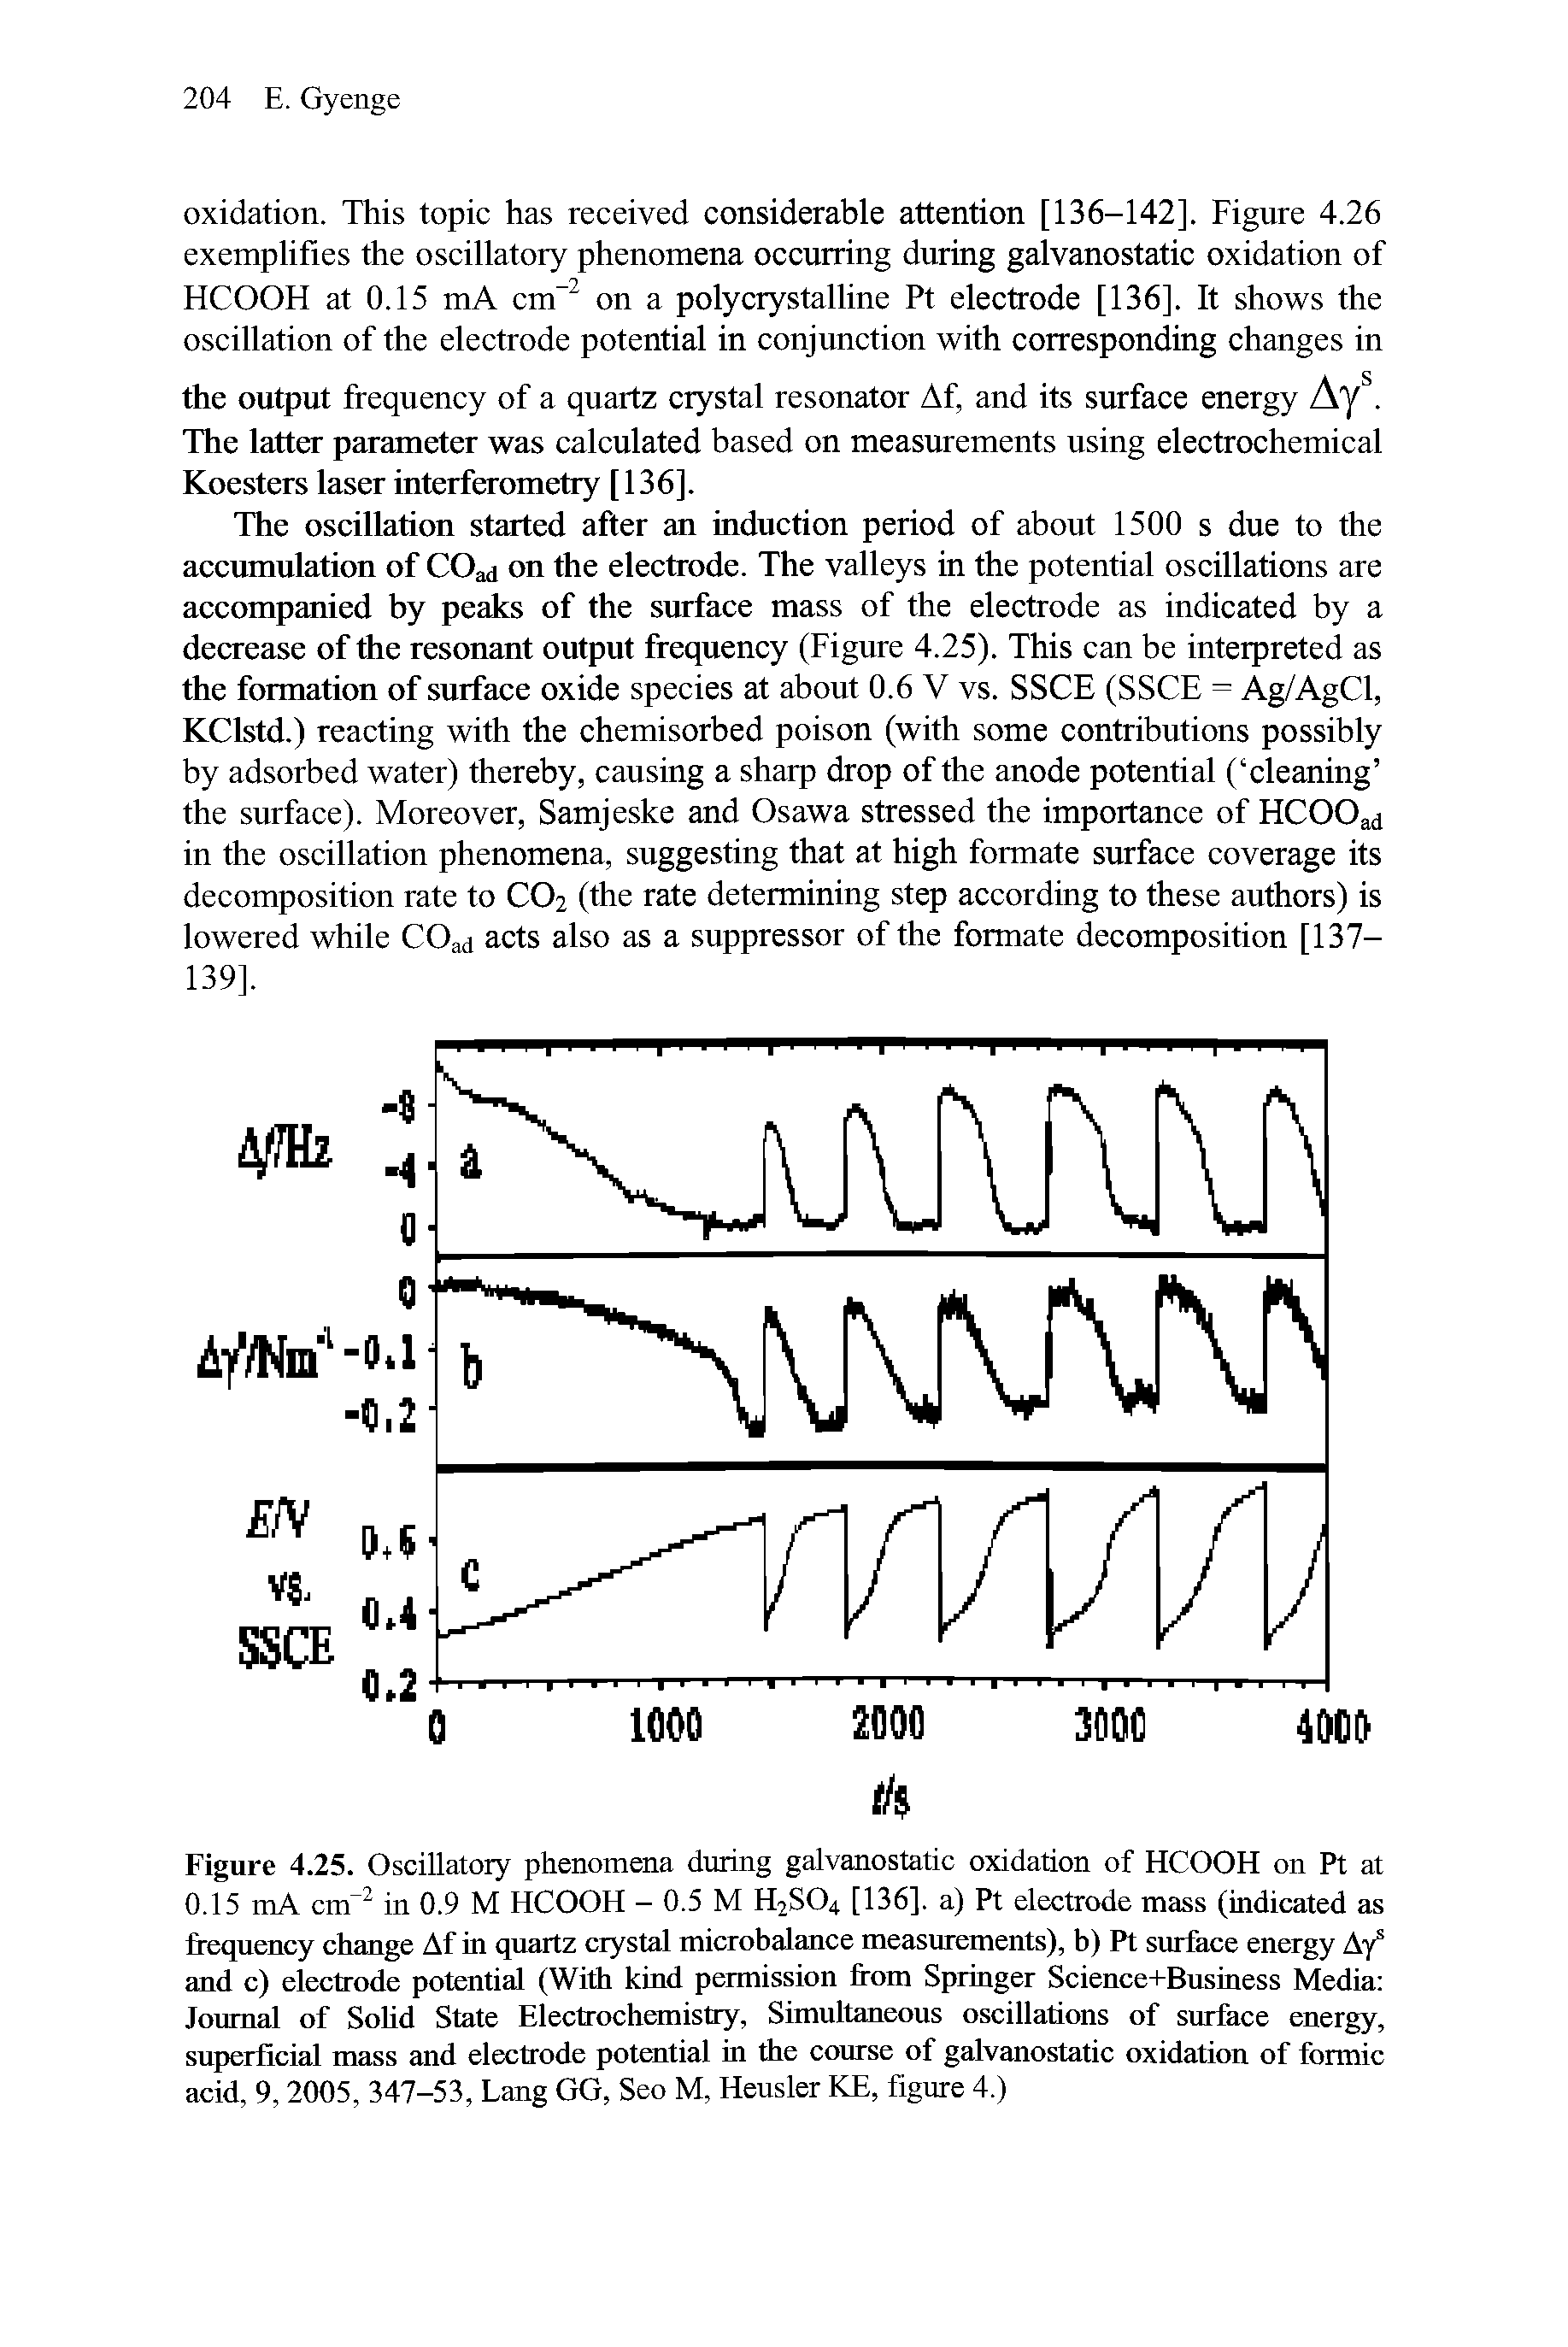 Figure 4.25. Oscillatory phenomena dining galvanostatic oxidation of HCOOH on Pt at 0.15 mA cm in 0.9 M HCOOH - 0.5 M H2SO4 [136]. a) Pt electrode mass (indicated as fiequency change Af in quartz crystal microbalance measurements), b) Pt surface energy Af and c) electrode potential (With kind permission from Springer Science+Business Media Journal of Solid State Electrochemistry, Simultaneous oscillations of surface energy, superficial mass and electrode potential in the course of galvanostatic oxidation of formic acid, 9,2005, 347-53, Lang GG, Seo M, Heusler KE, figure 4.)...